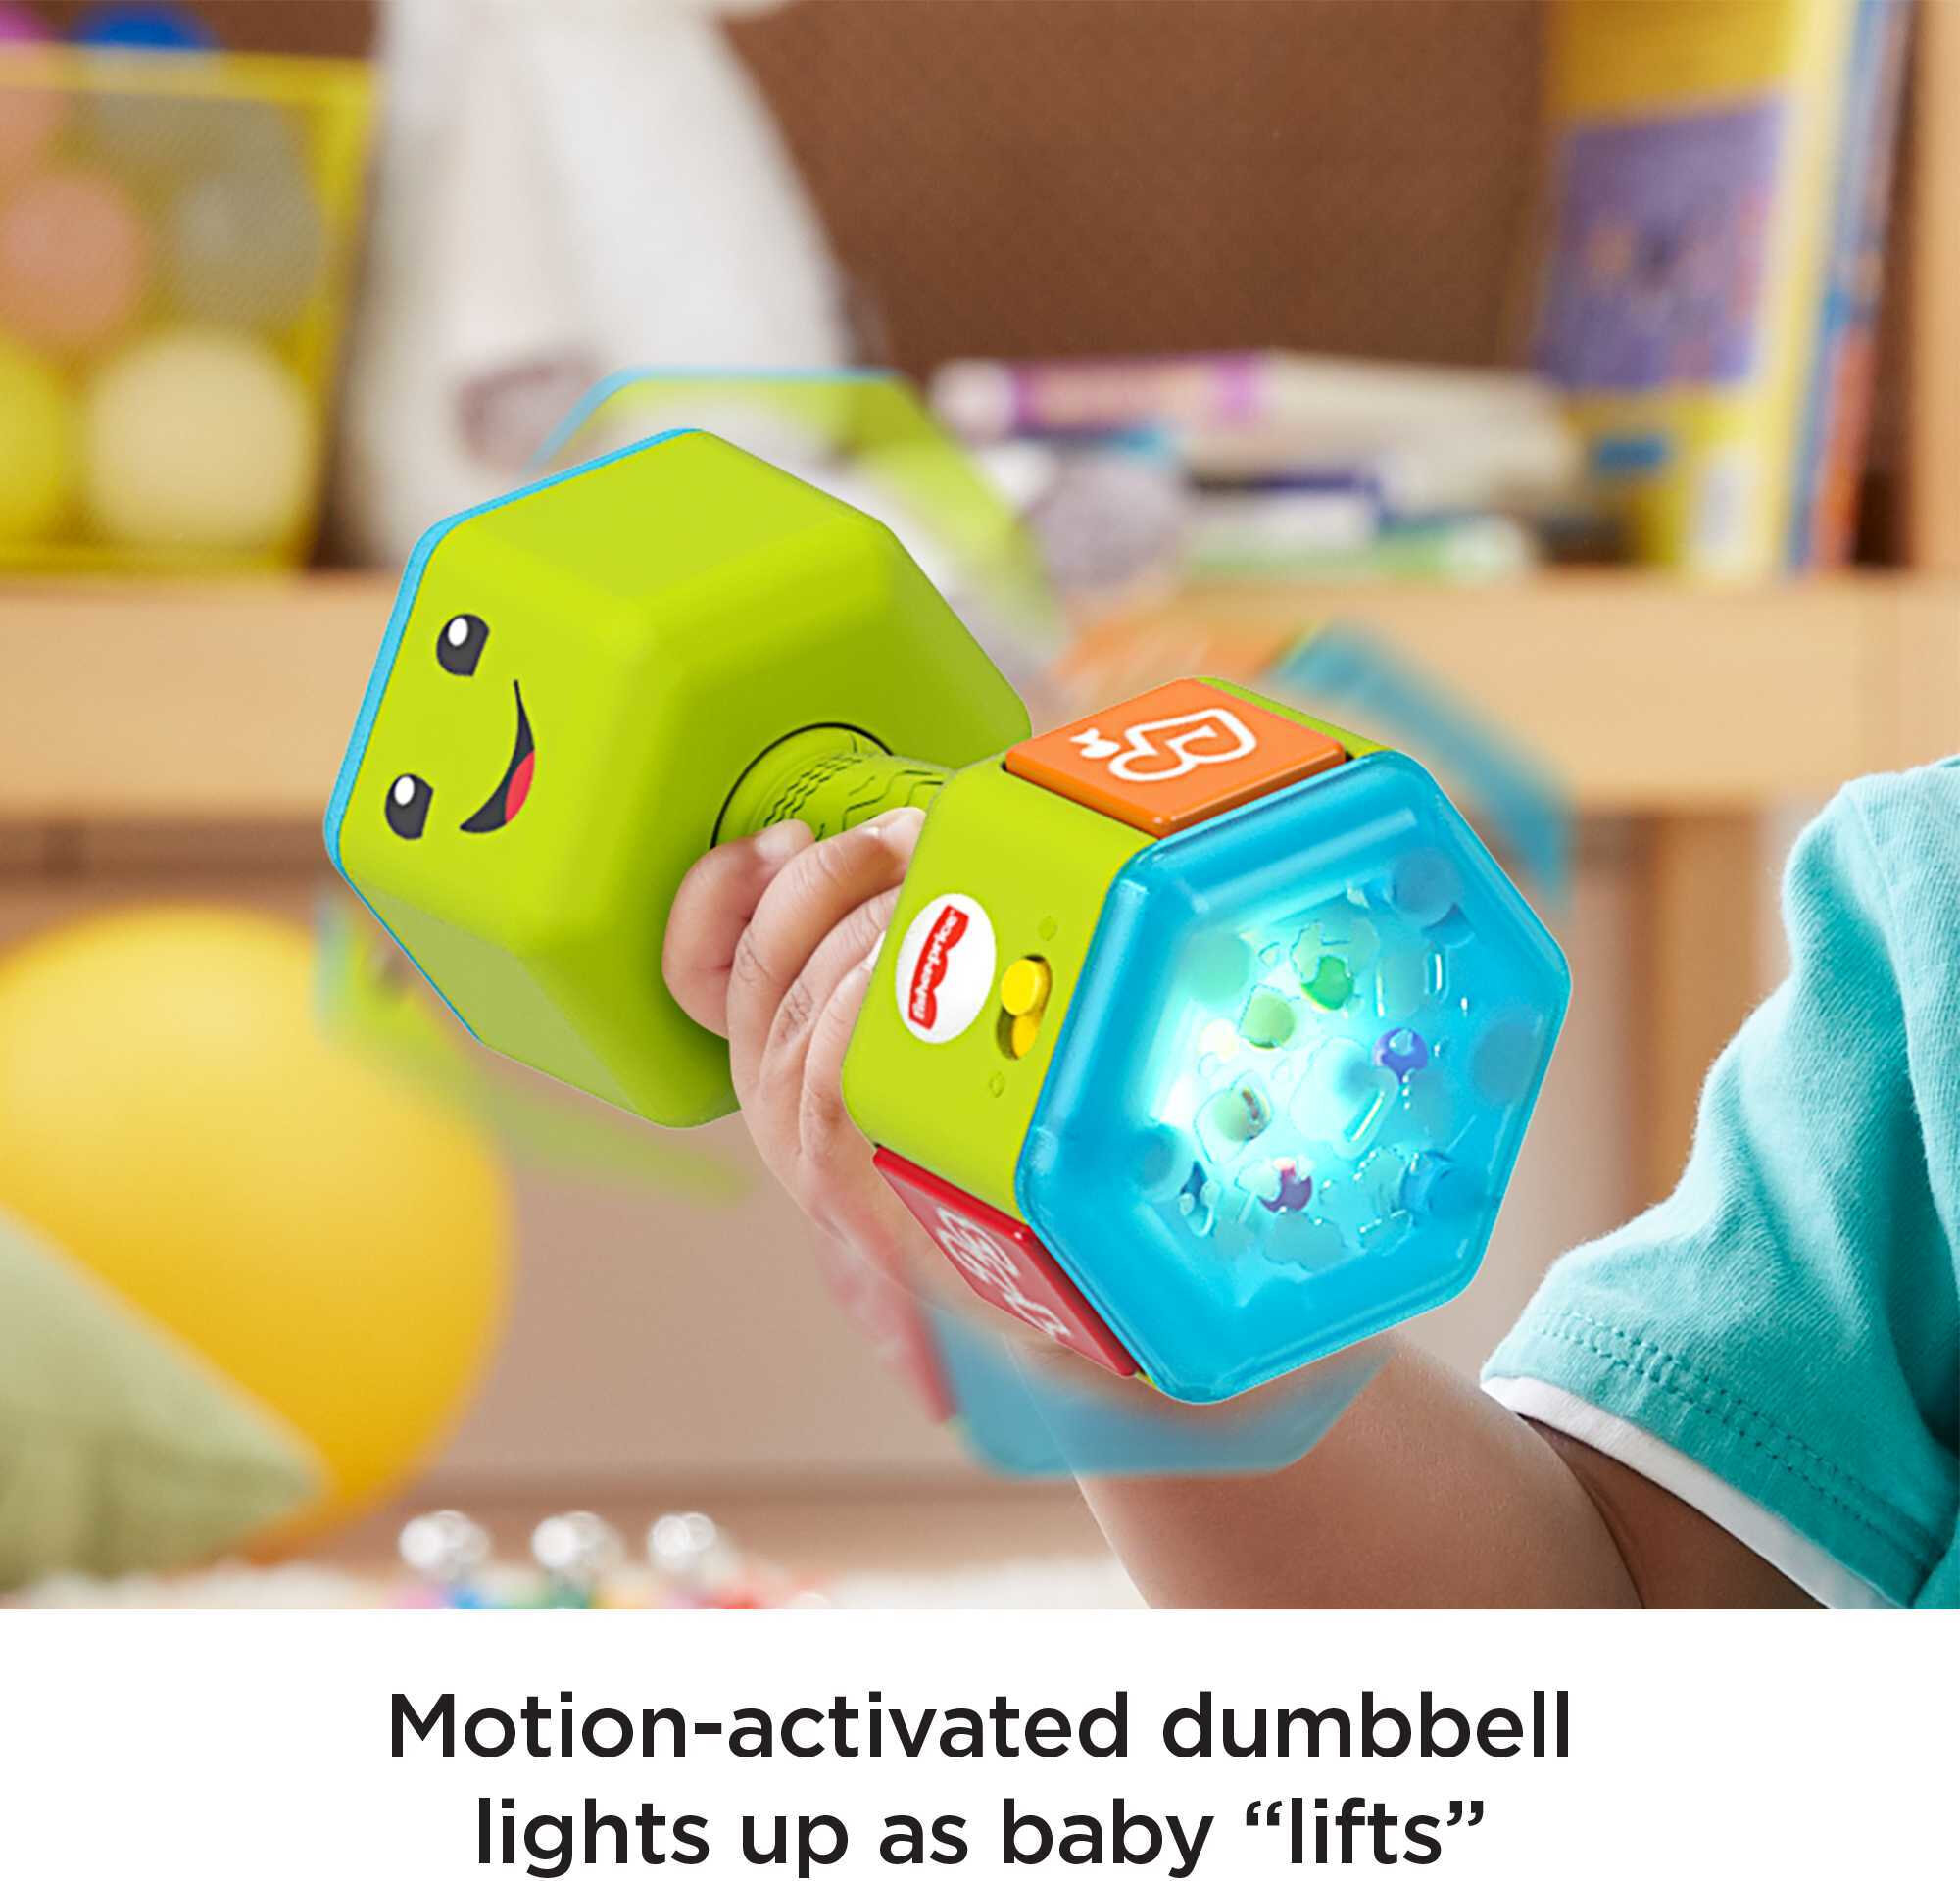 Fisher-Price Laugh & Learn Countin’ Reps Dumbbell Musical Rattle Toy for Infant & Toddler - image 3 of 6